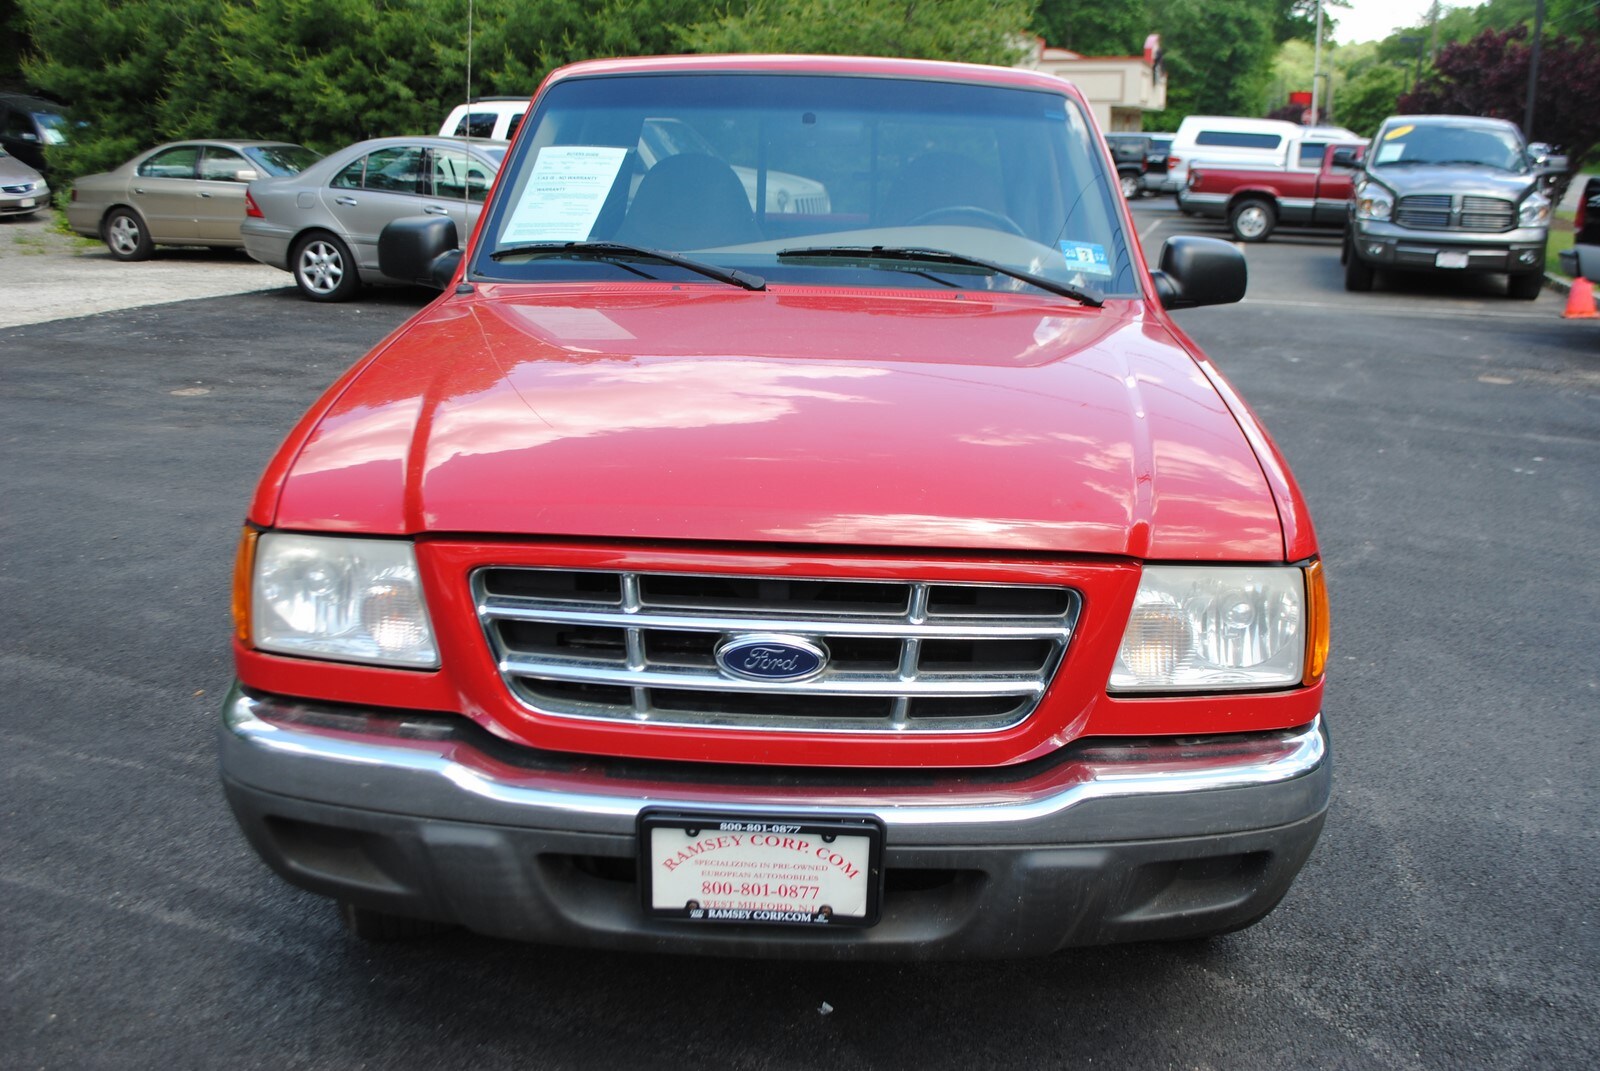 Used 2001 Ford Ranger For Sale At Ramsey Corp Vin